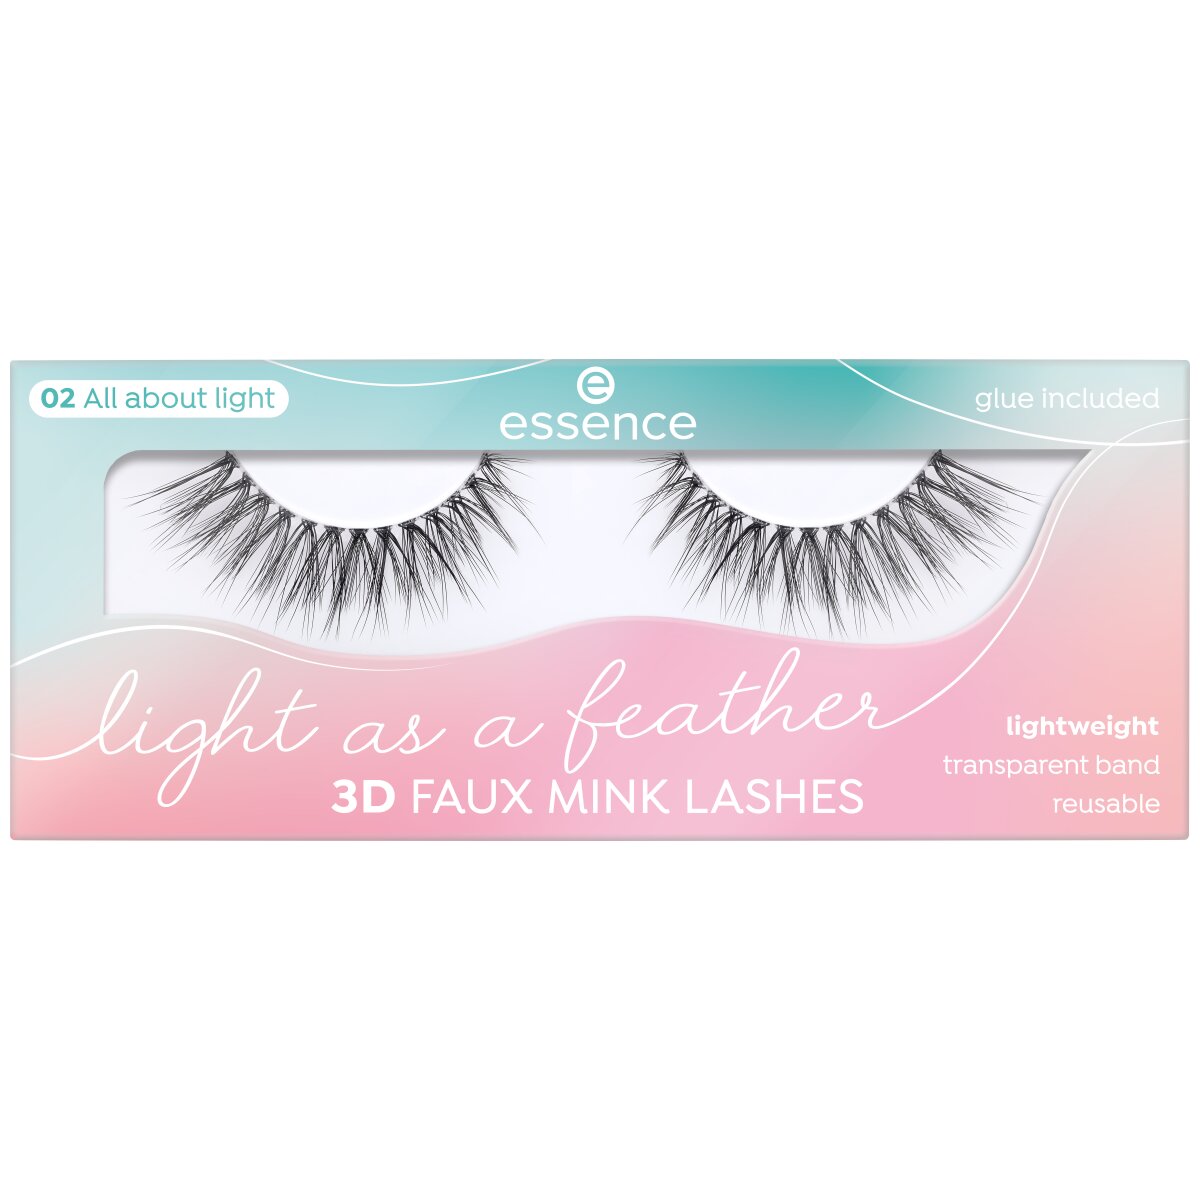 – A Feather Light of essence Mink 3D As Cosmetics House Lashes Faux